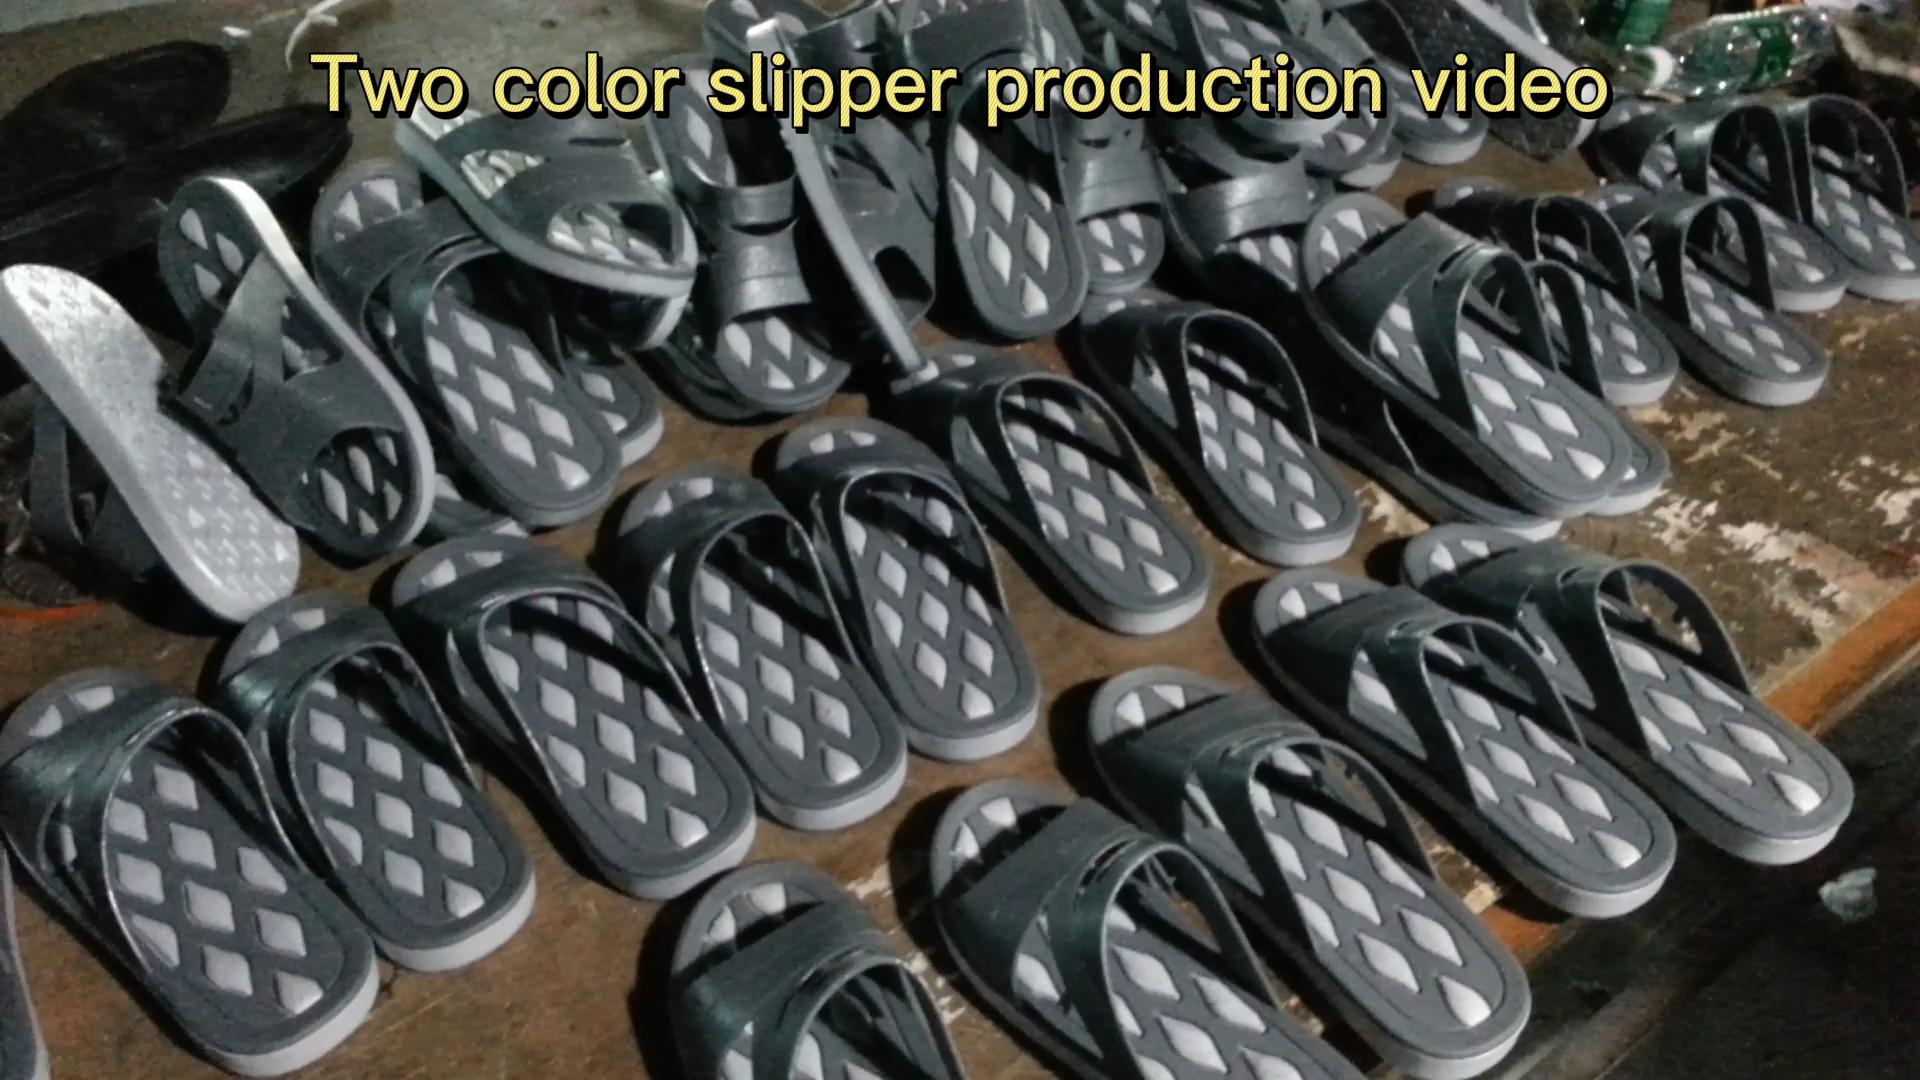 Two color slipper production video